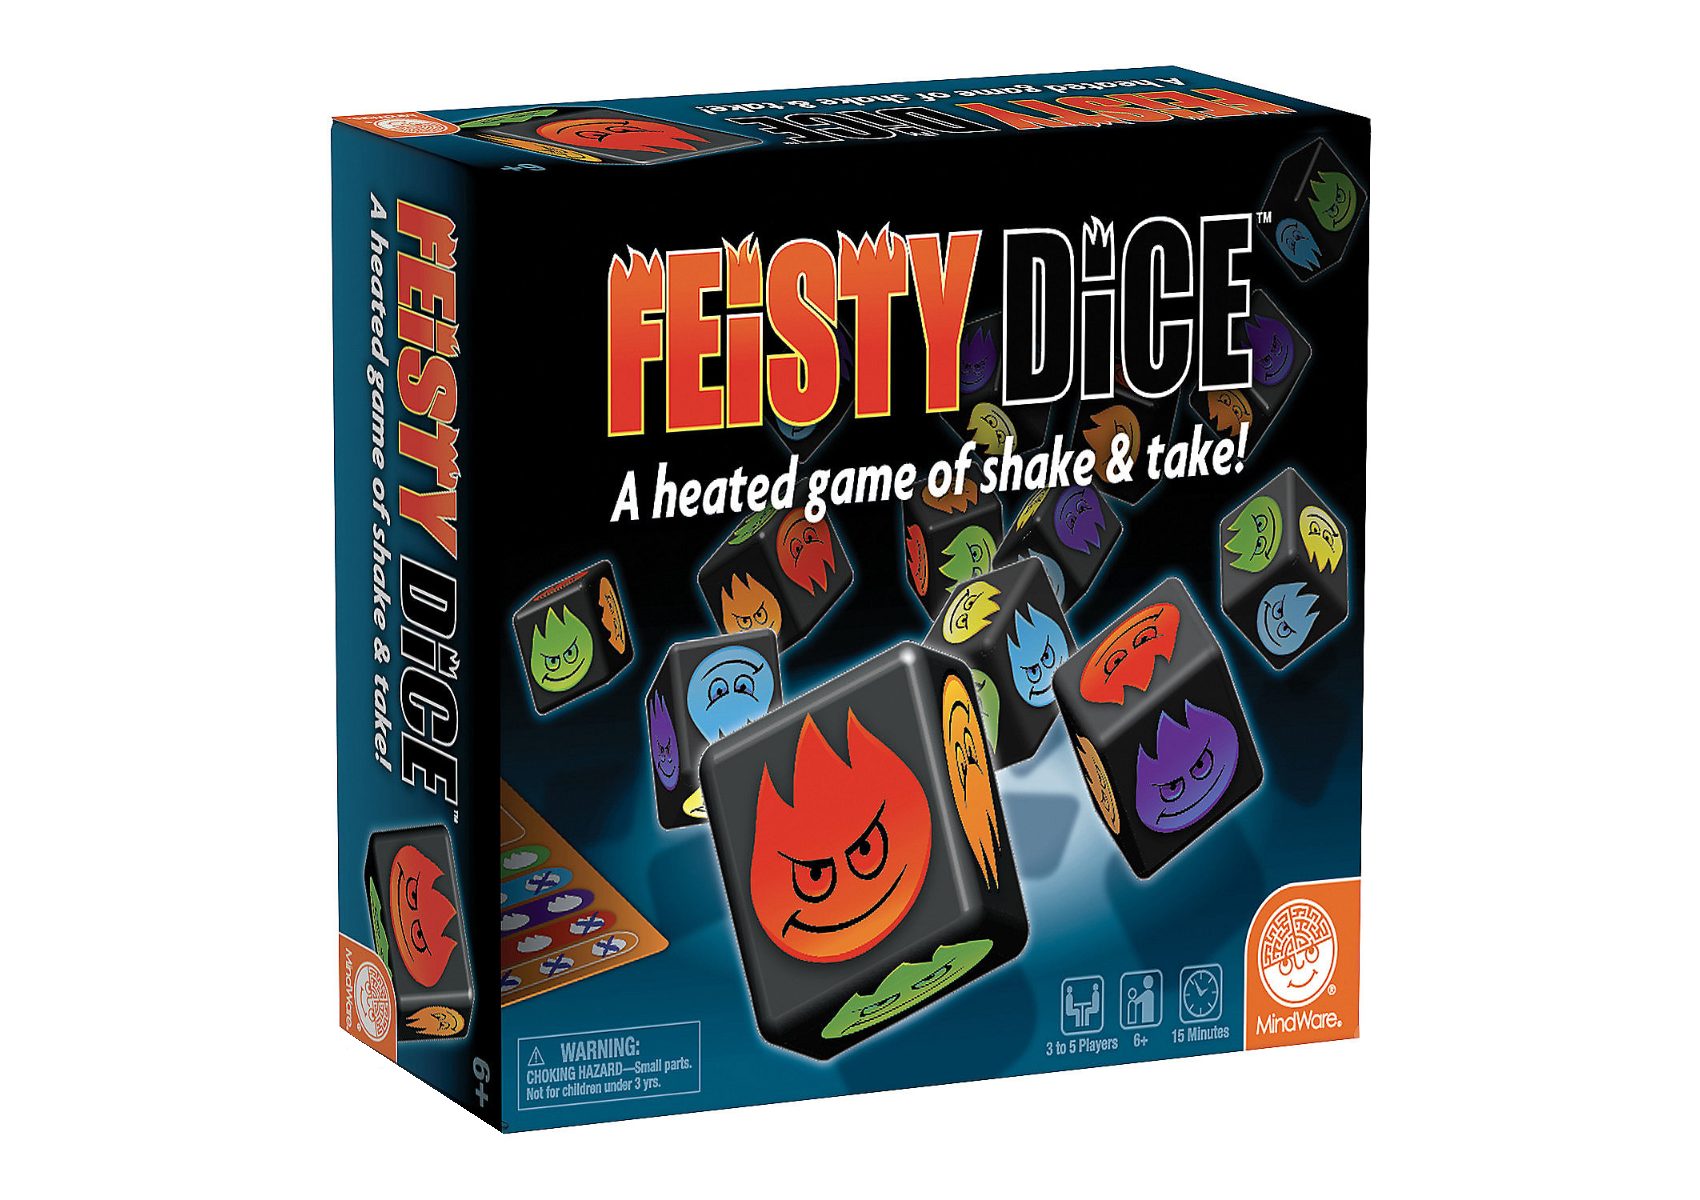 Feisty Dice Game box showing multicolored dice with flame faces